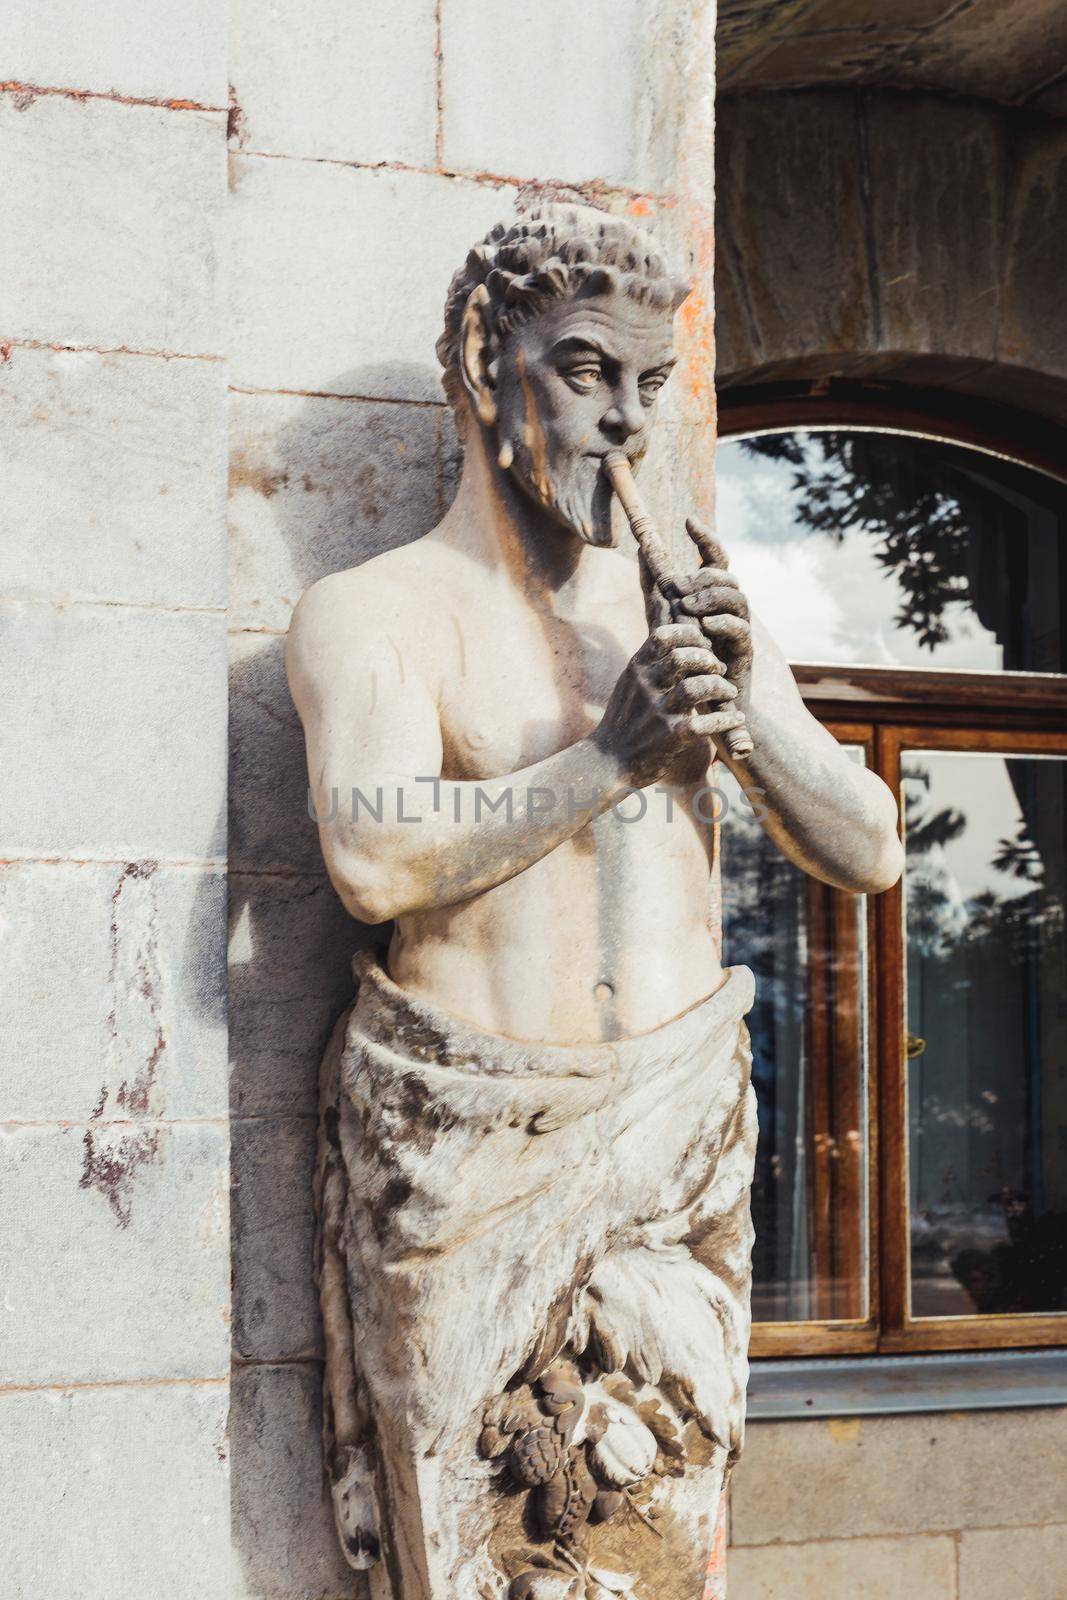 ALUPKA, CRIMEA - February 10, 2015. Statue of Satyr playing the pipe in front of Massandra Palace. Chateauesque villa of Emperor Alexander III of Russia by aksenovko